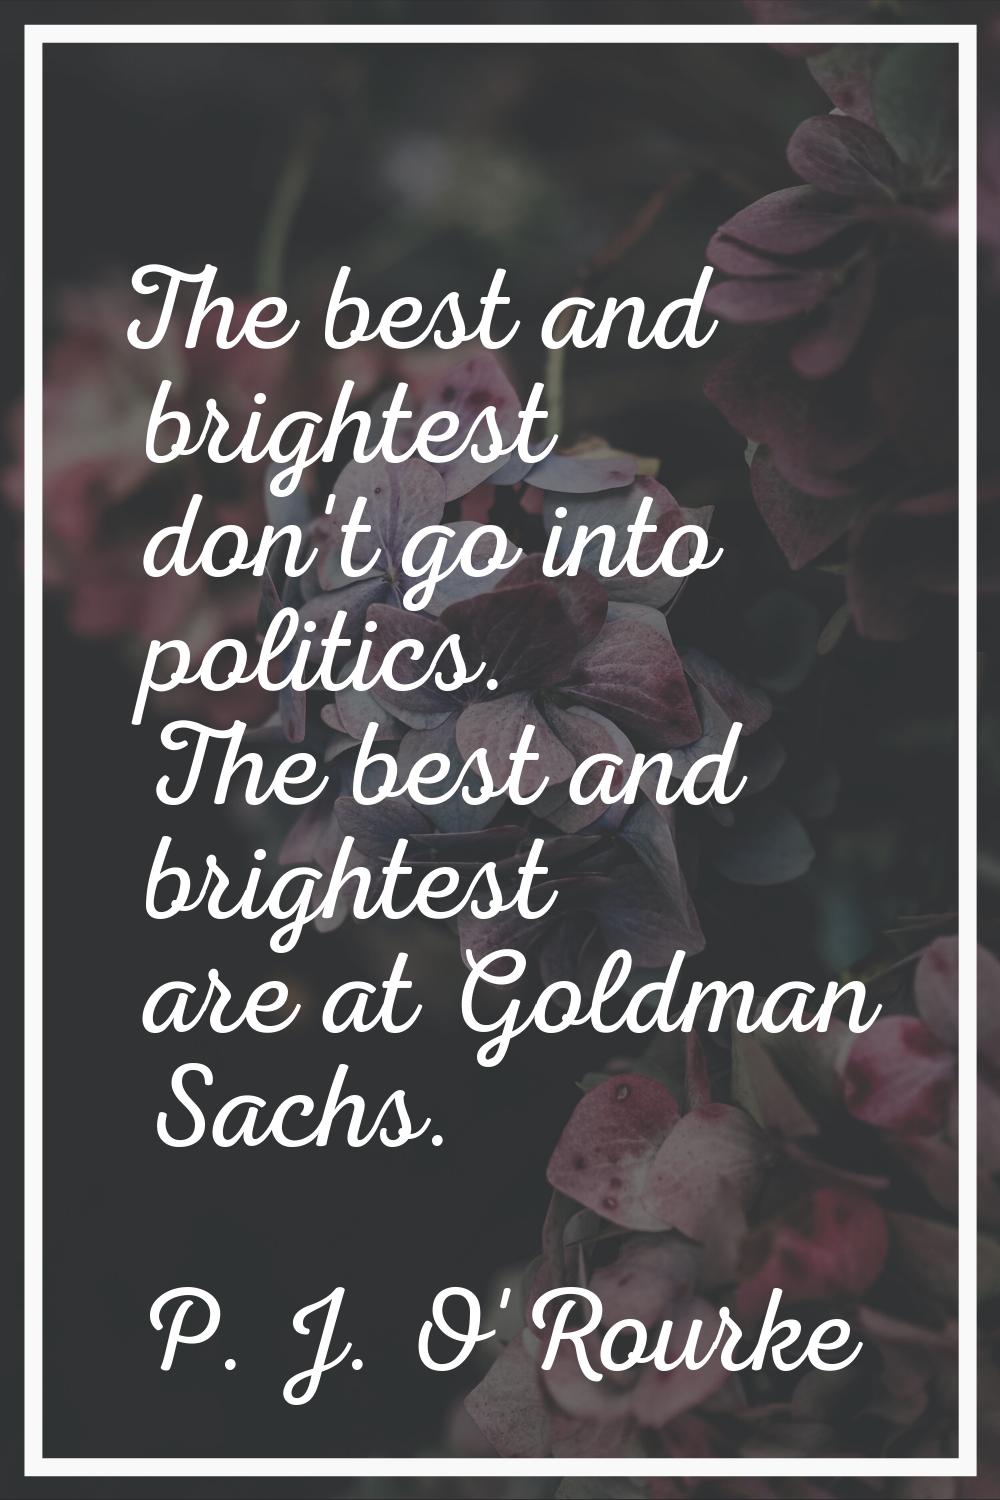 The best and brightest don't go into politics. The best and brightest are at Goldman Sachs.